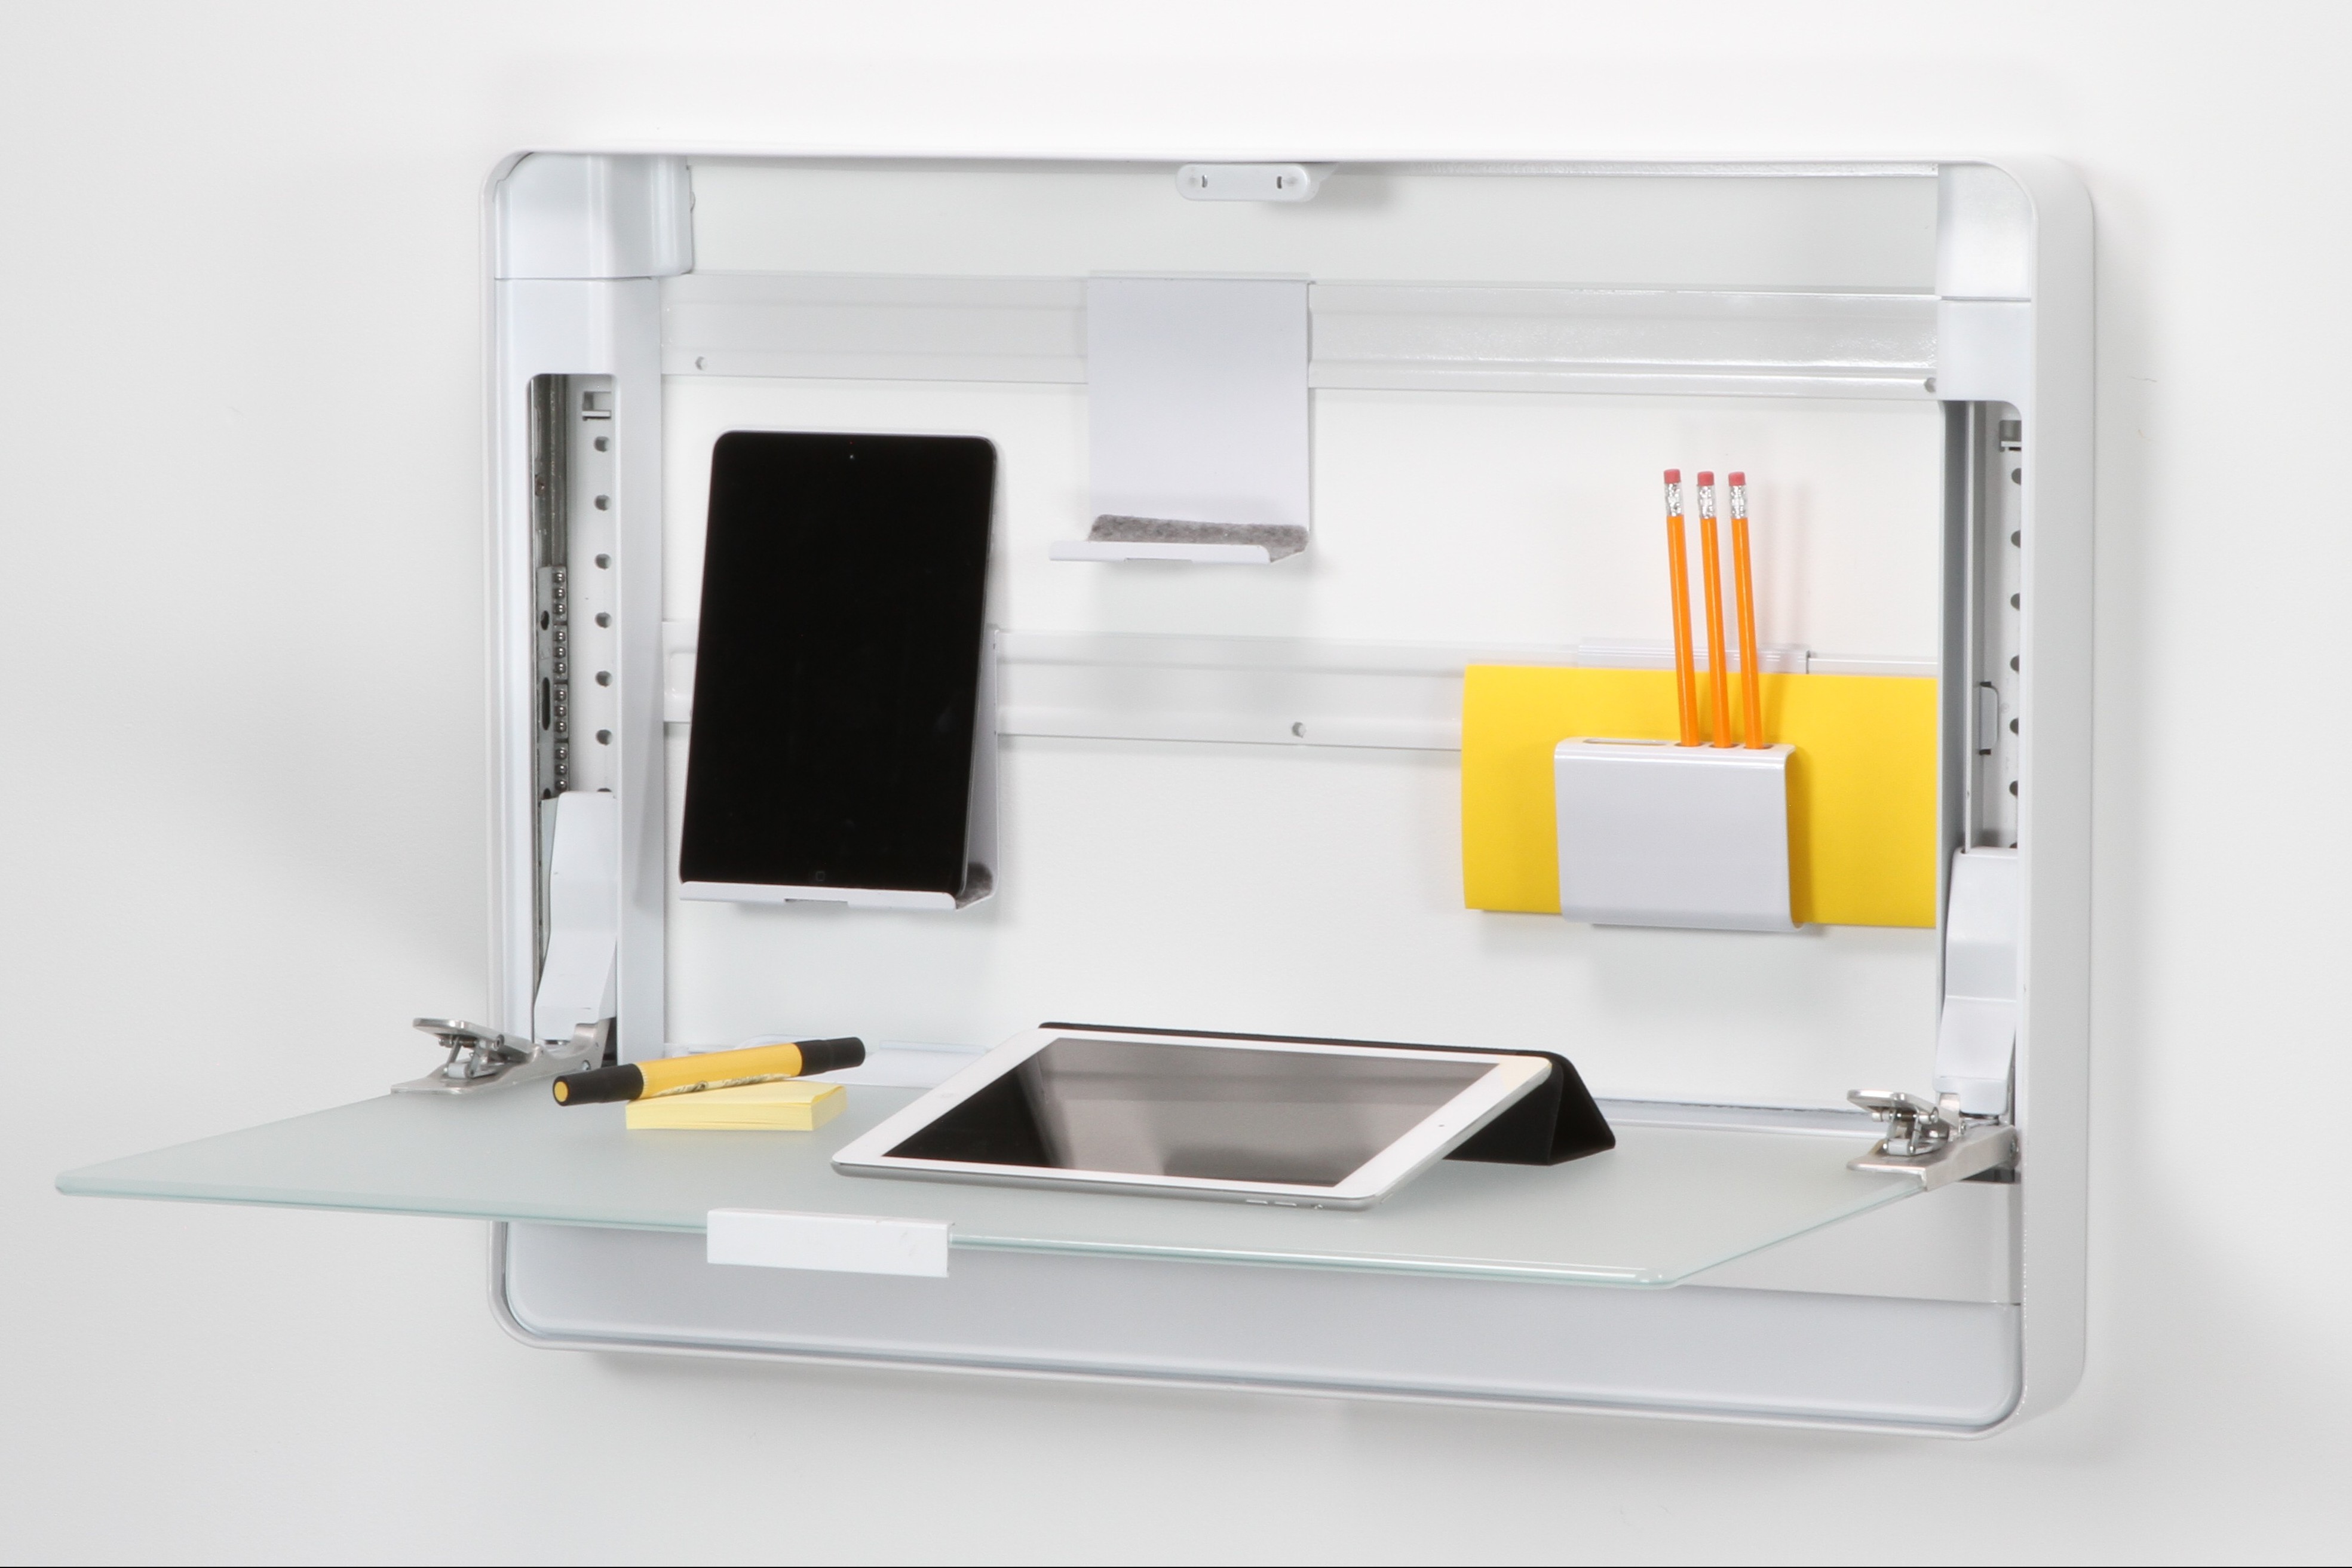 Review: The OmniMount WorkSpace Wall Organizer